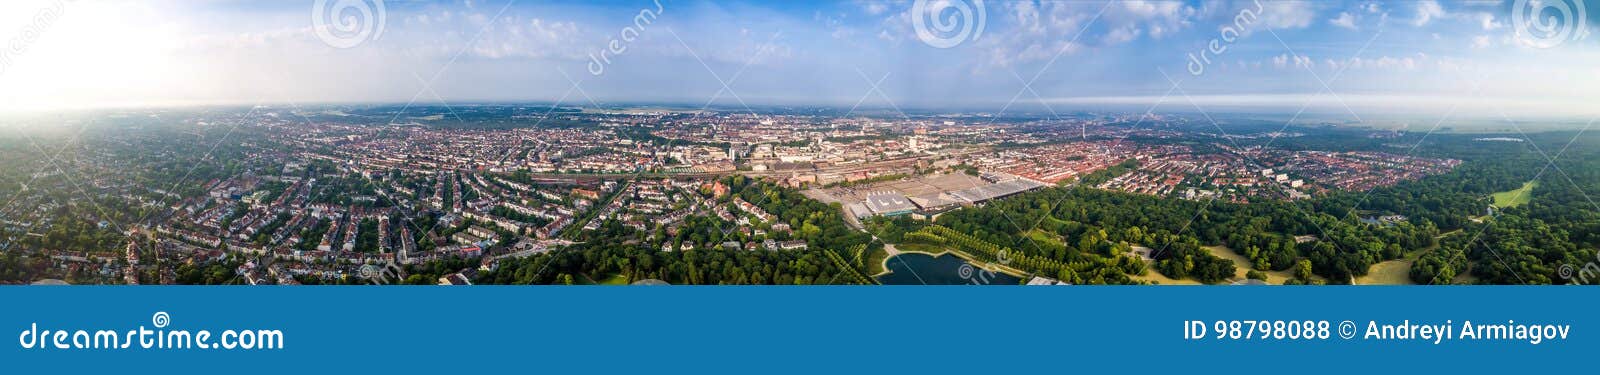 city municipality of bremen aerial fpv drone photography.. bremen is a major cultural and economic hub in the northern regions